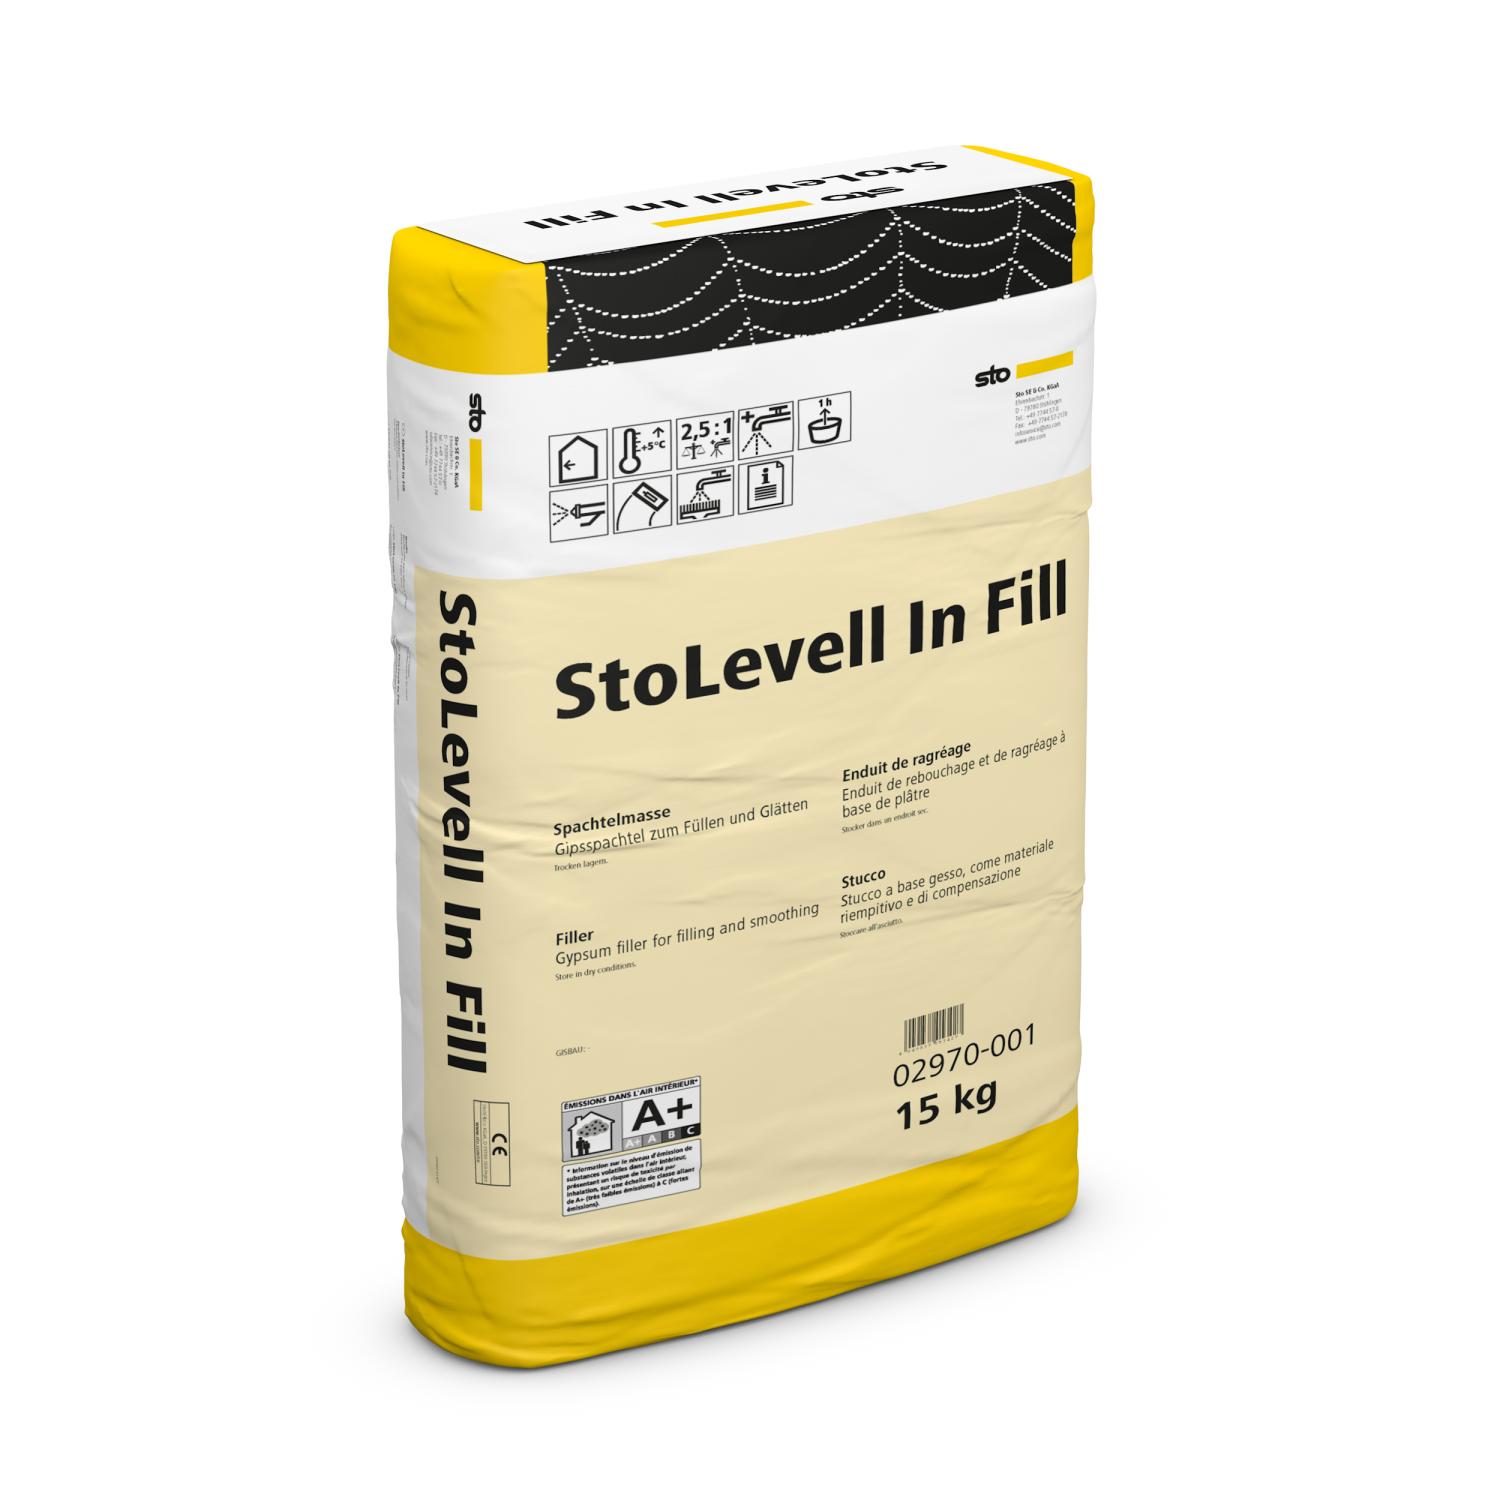 StoLevell In Fill - 5 kg Sack